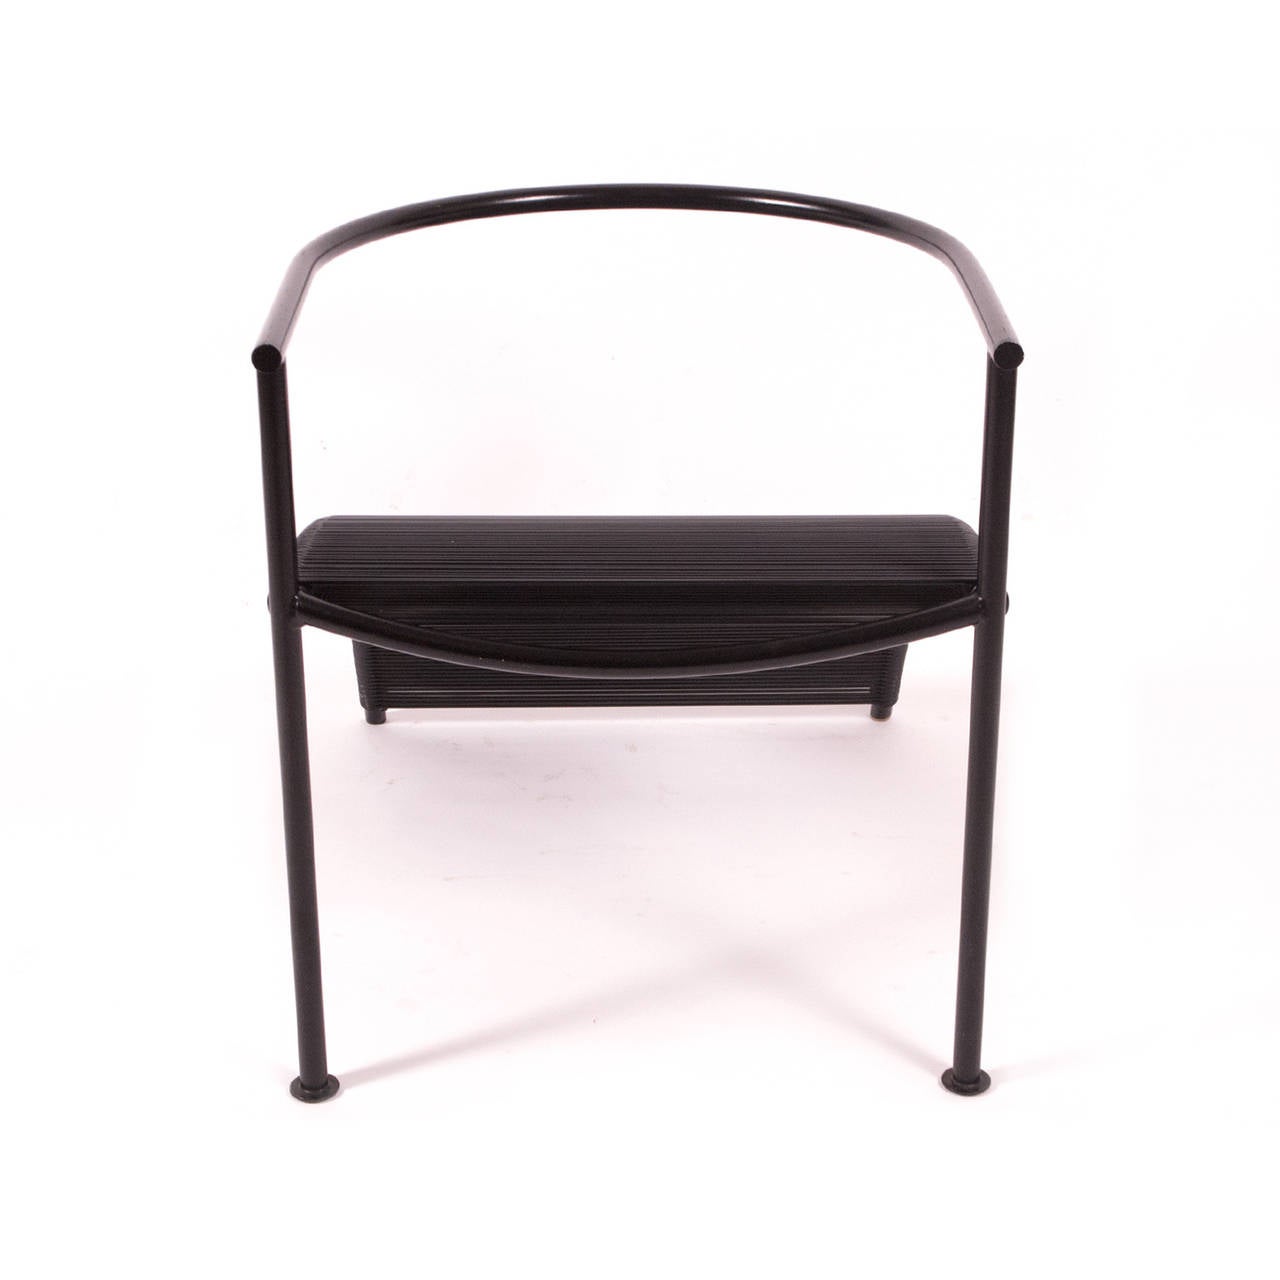 Black painted steel tubing and rubber string seat,design by Philippe Starck in 1983 ,manufacture by XO Paris